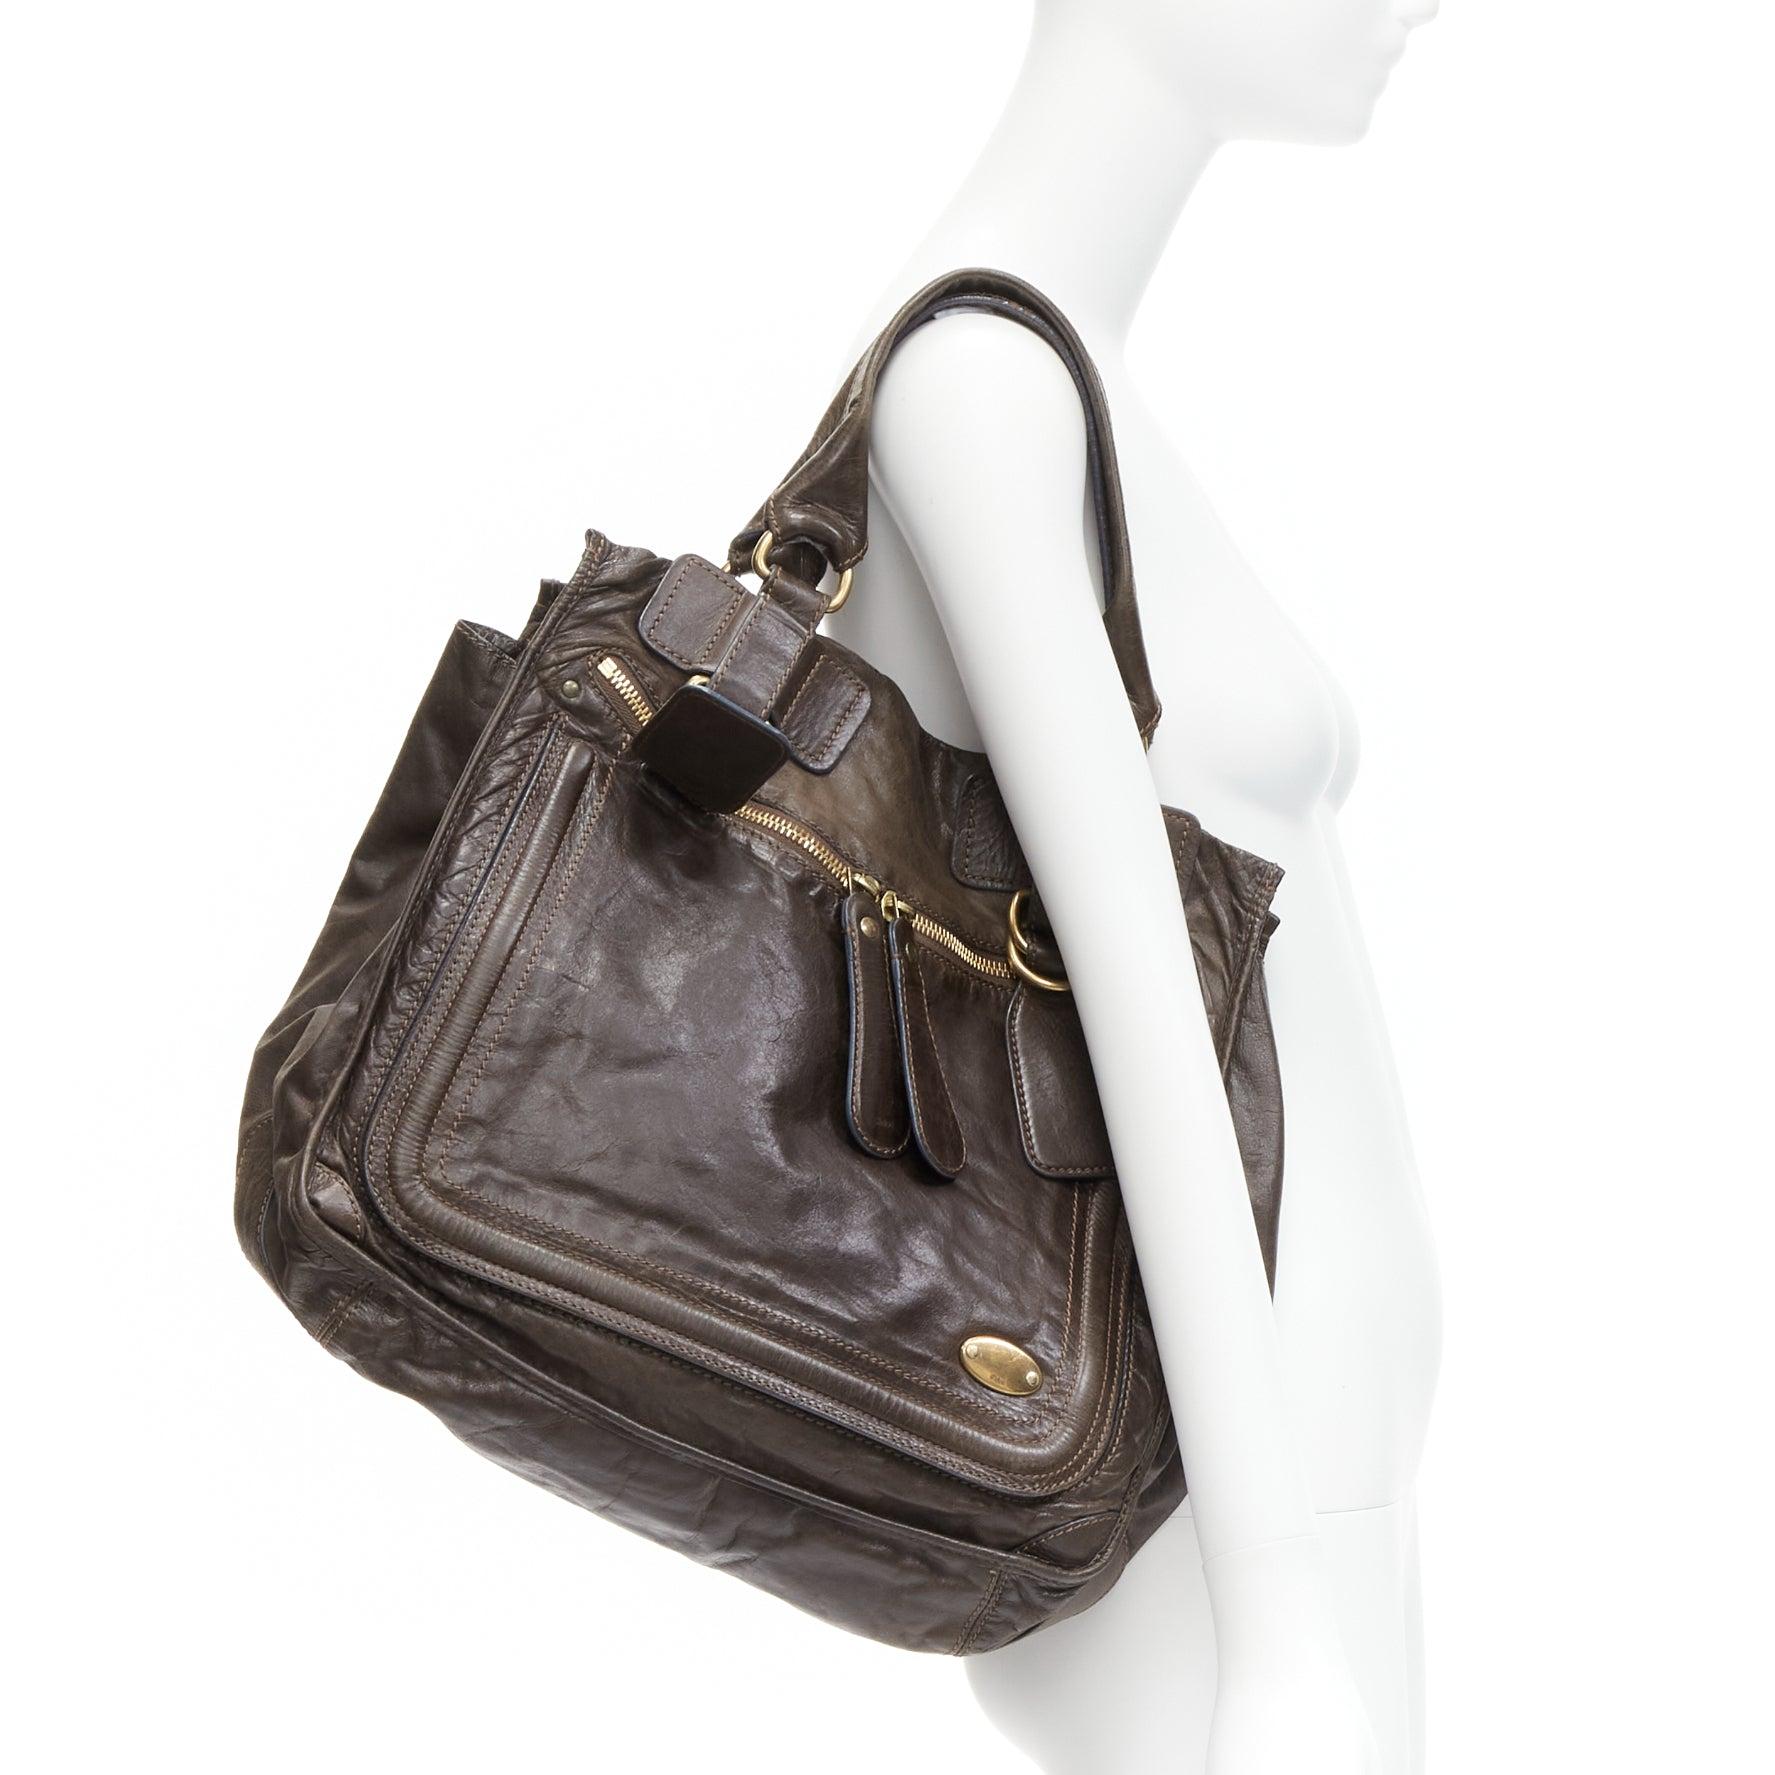 CHLOE dark brown soft leather oversized zipper pull pipe trim tote bag
Reference: GIYG/A00298
Brand: Chloe
Material: Leather, Metal
Color: Brown
Pattern: Solid
Lining: Bronze Fabric
Made in: Italy

CONDITION:
Condition: Fair, this item was pre-owned